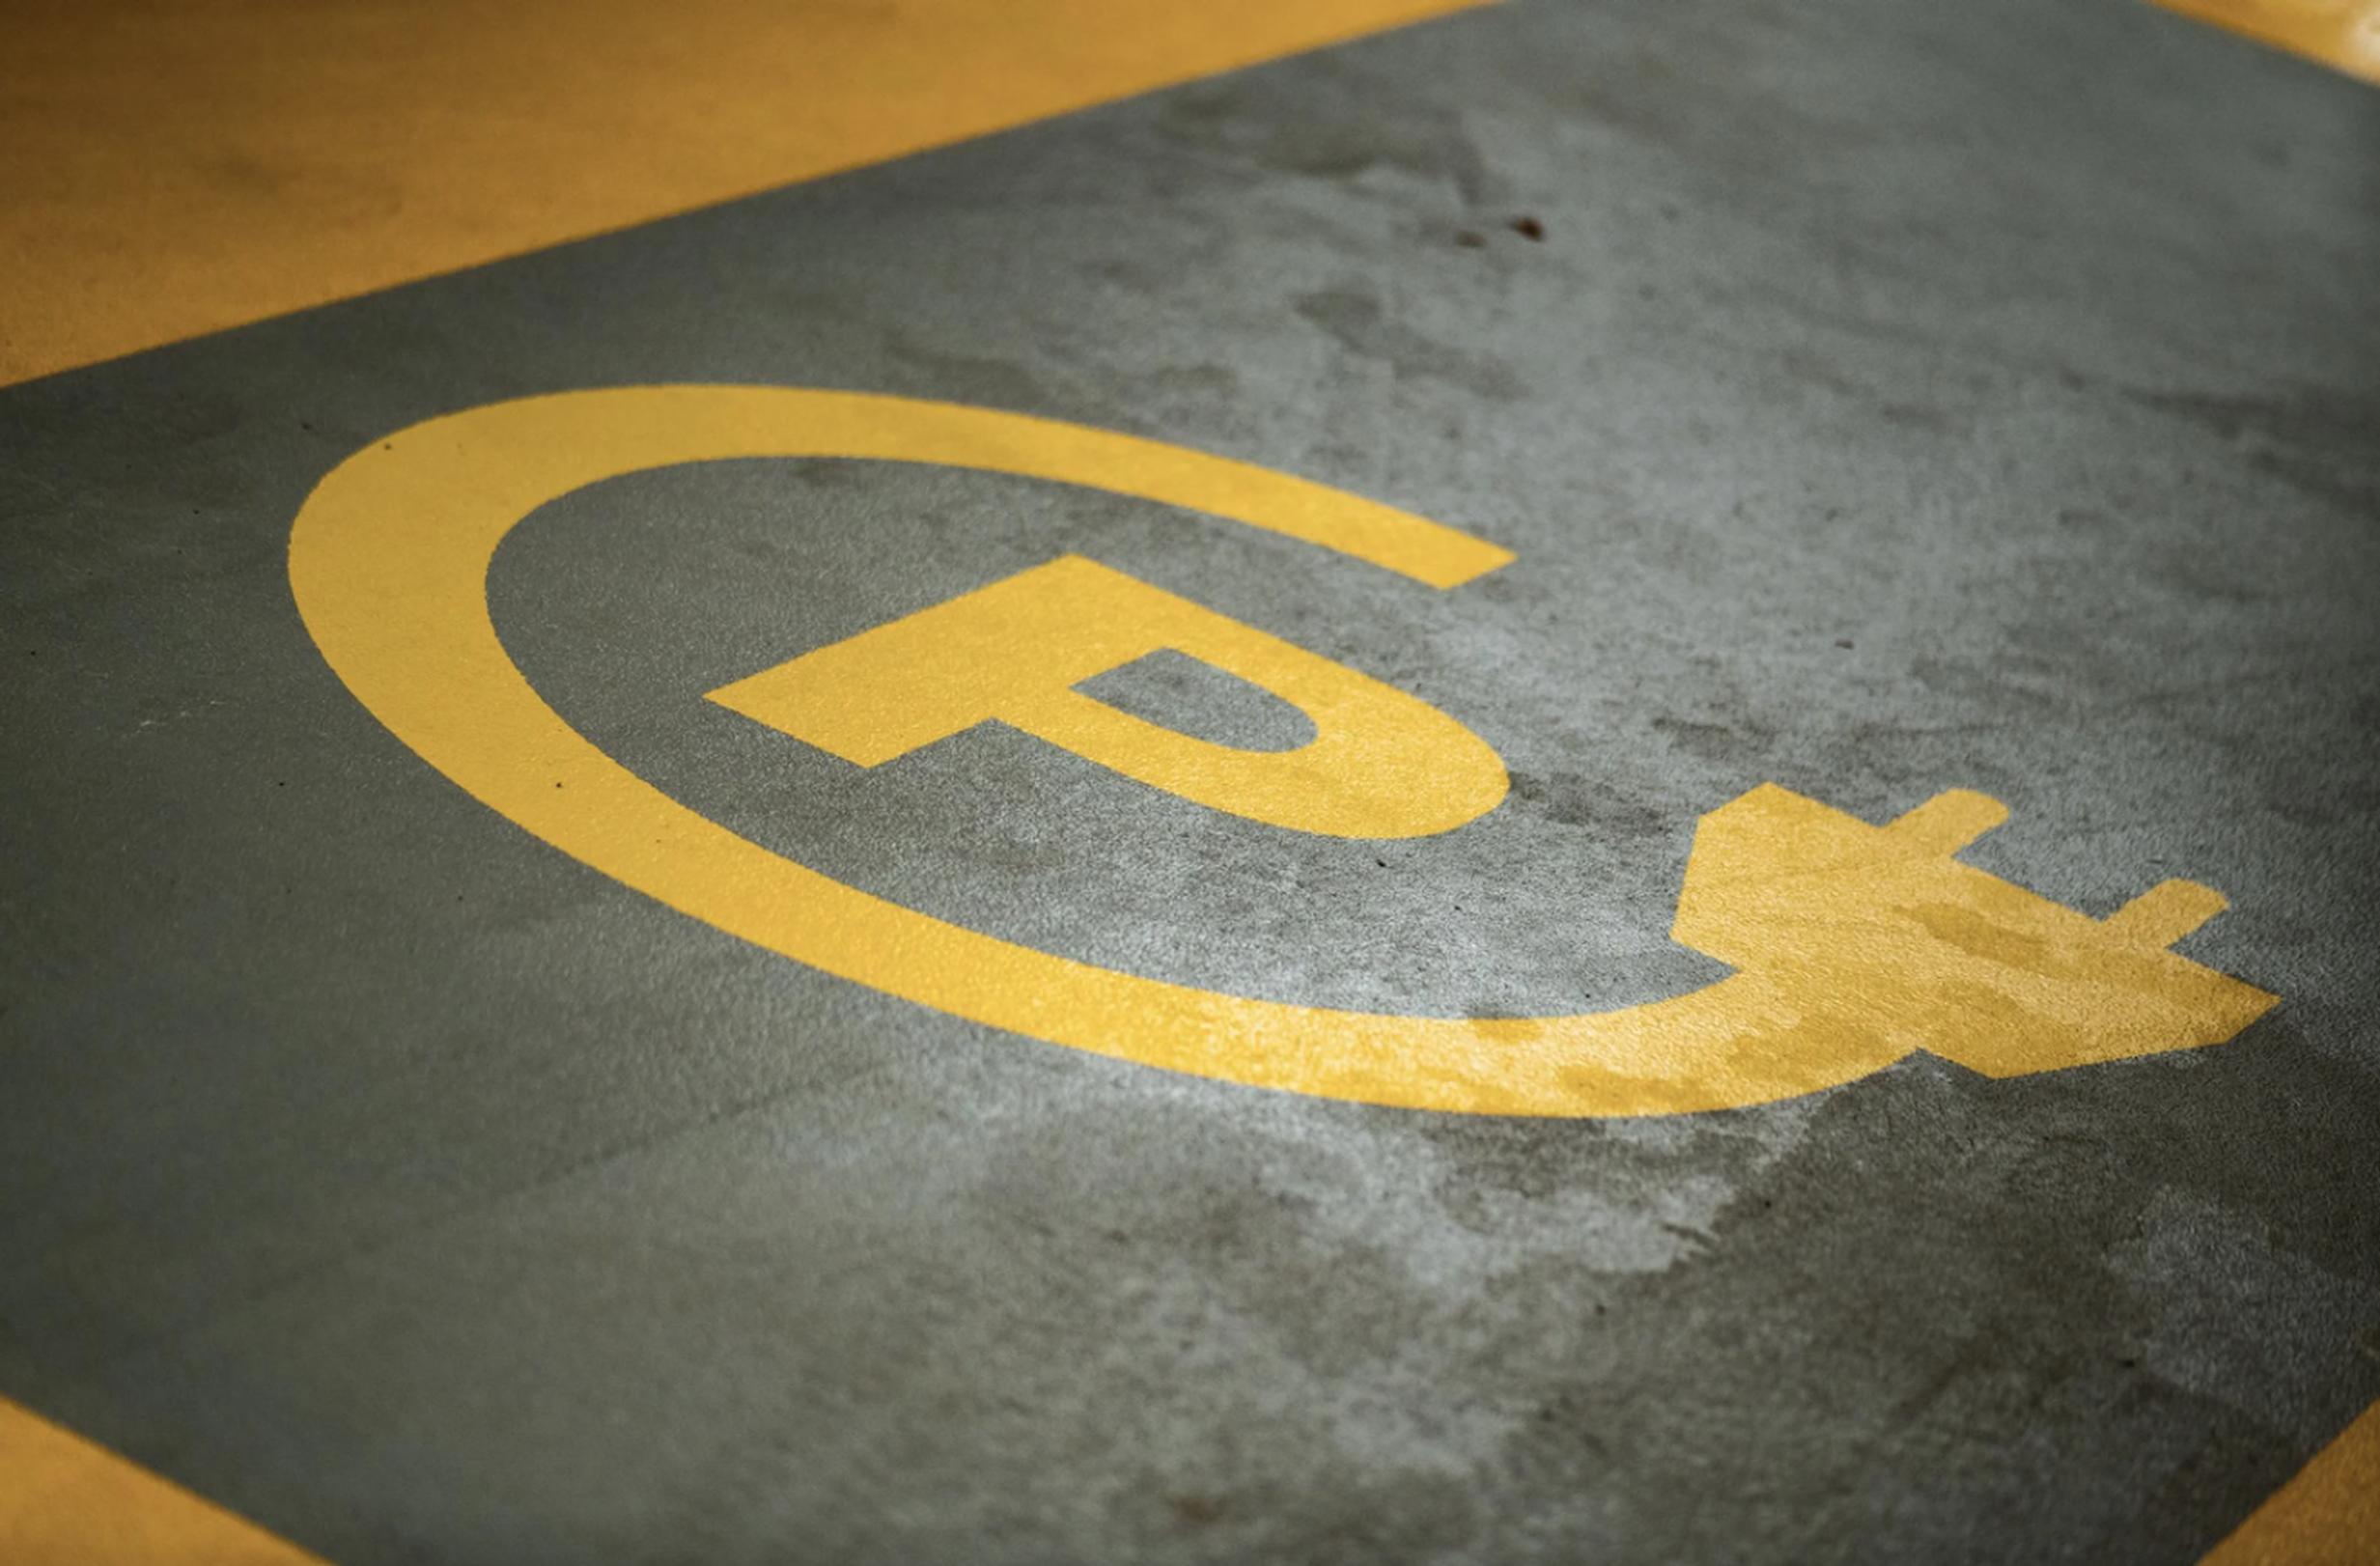 Much of what is now called ‘parking’ will become an energy delivery service (Michael Fousert)